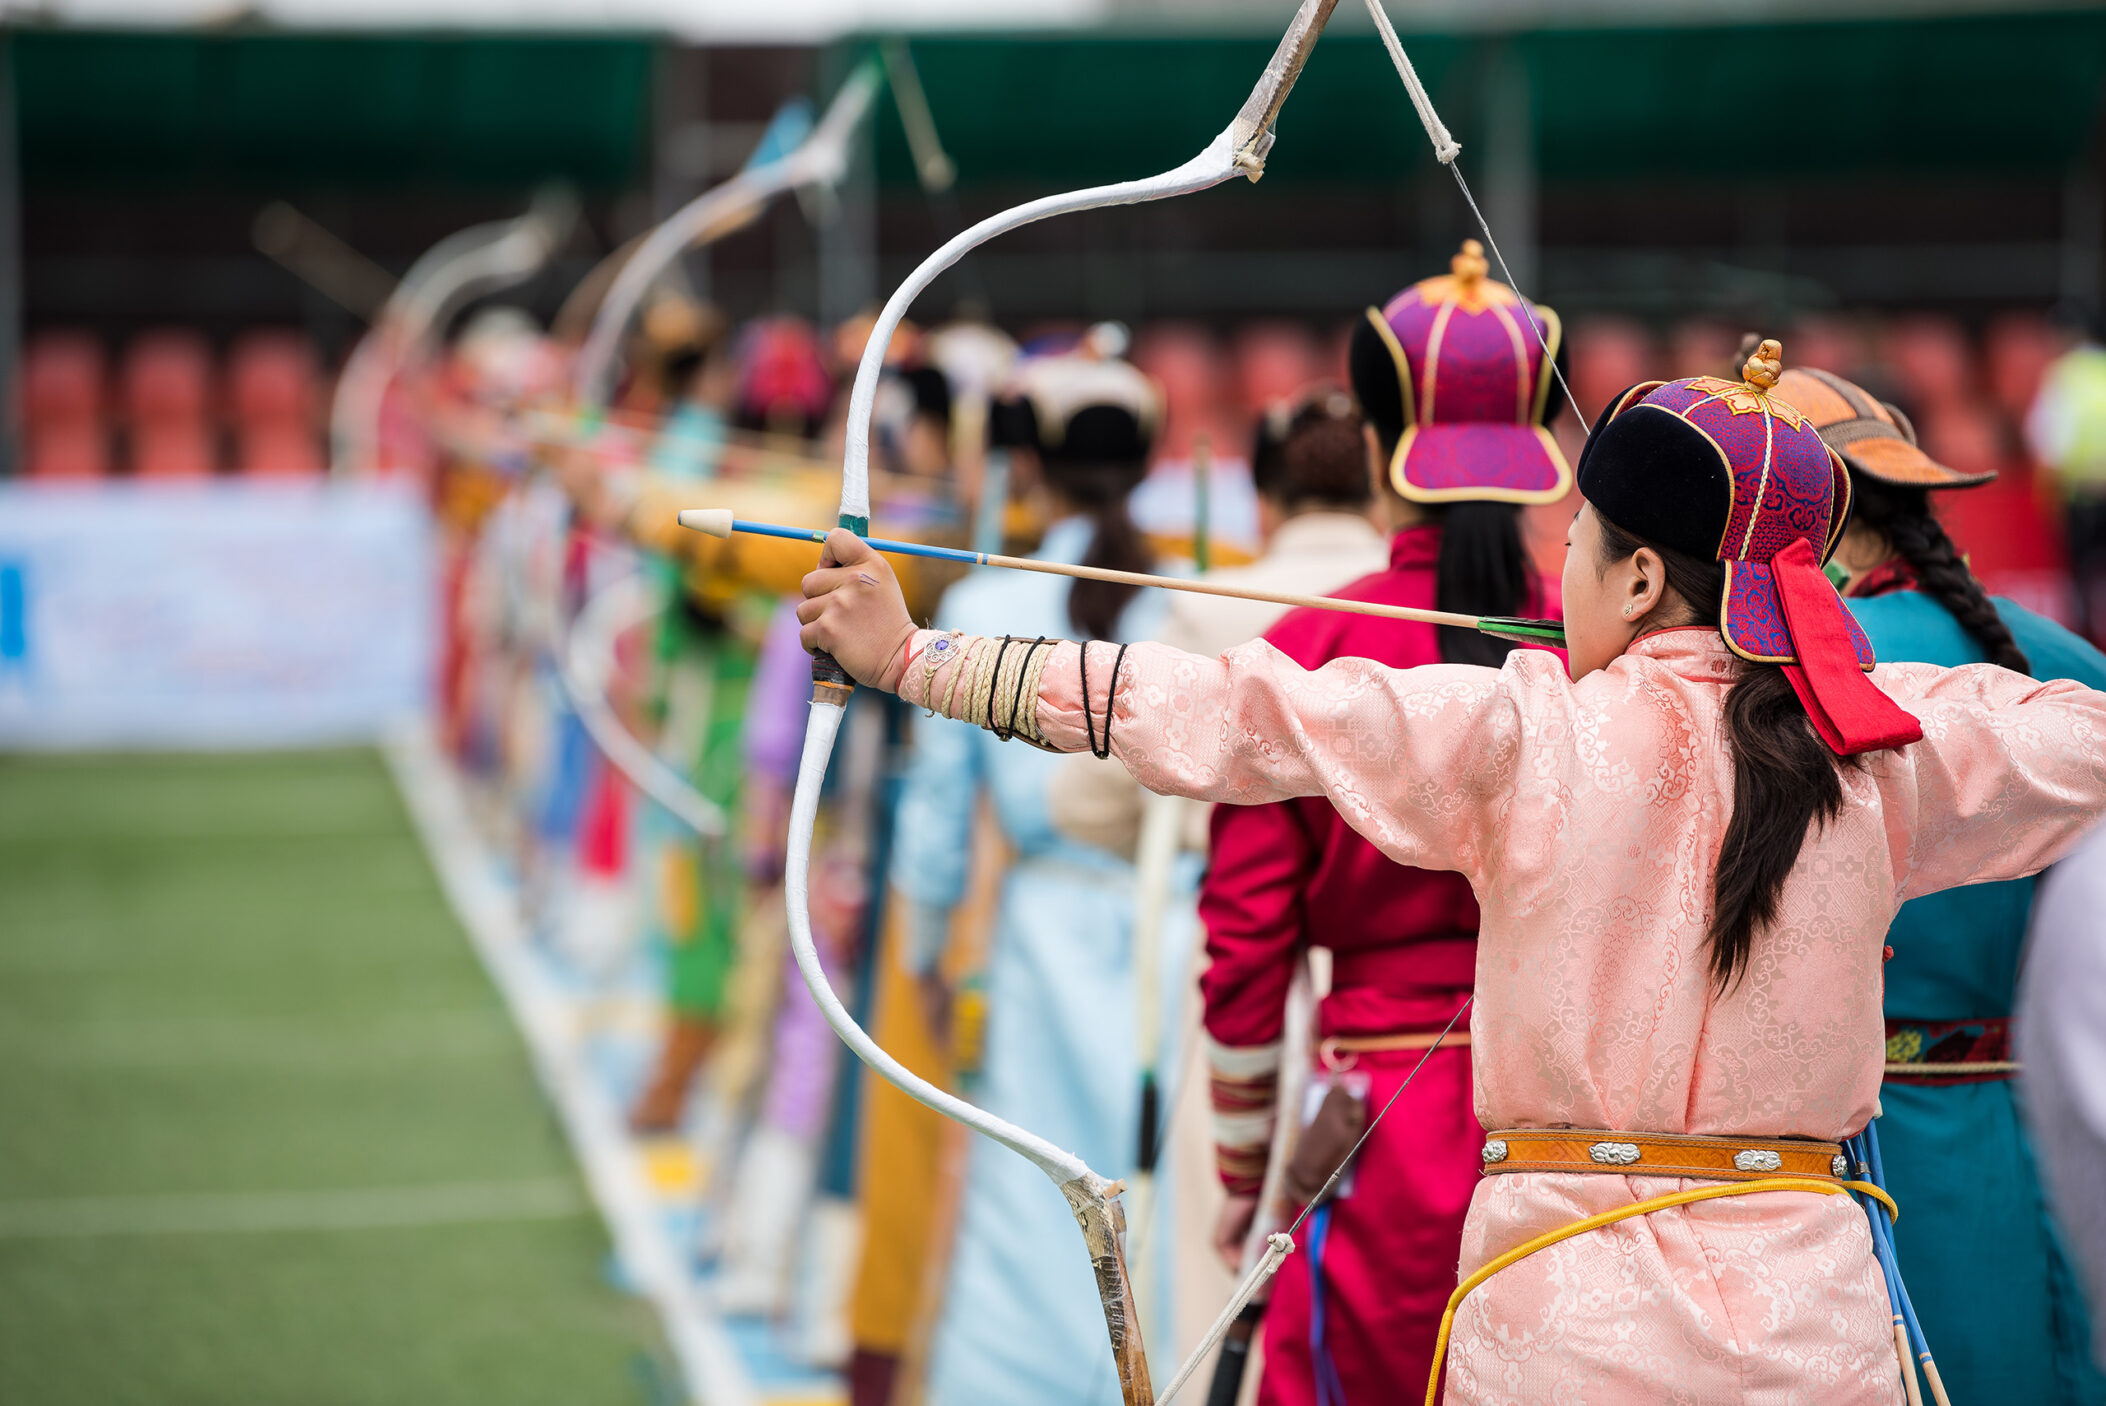 Naadam festival Mongolia archery, Mongolian women in traditional Mongolian dress shooting arrows with Mongol bow and arrow, colorful traditional costumes during Naadam competition in july